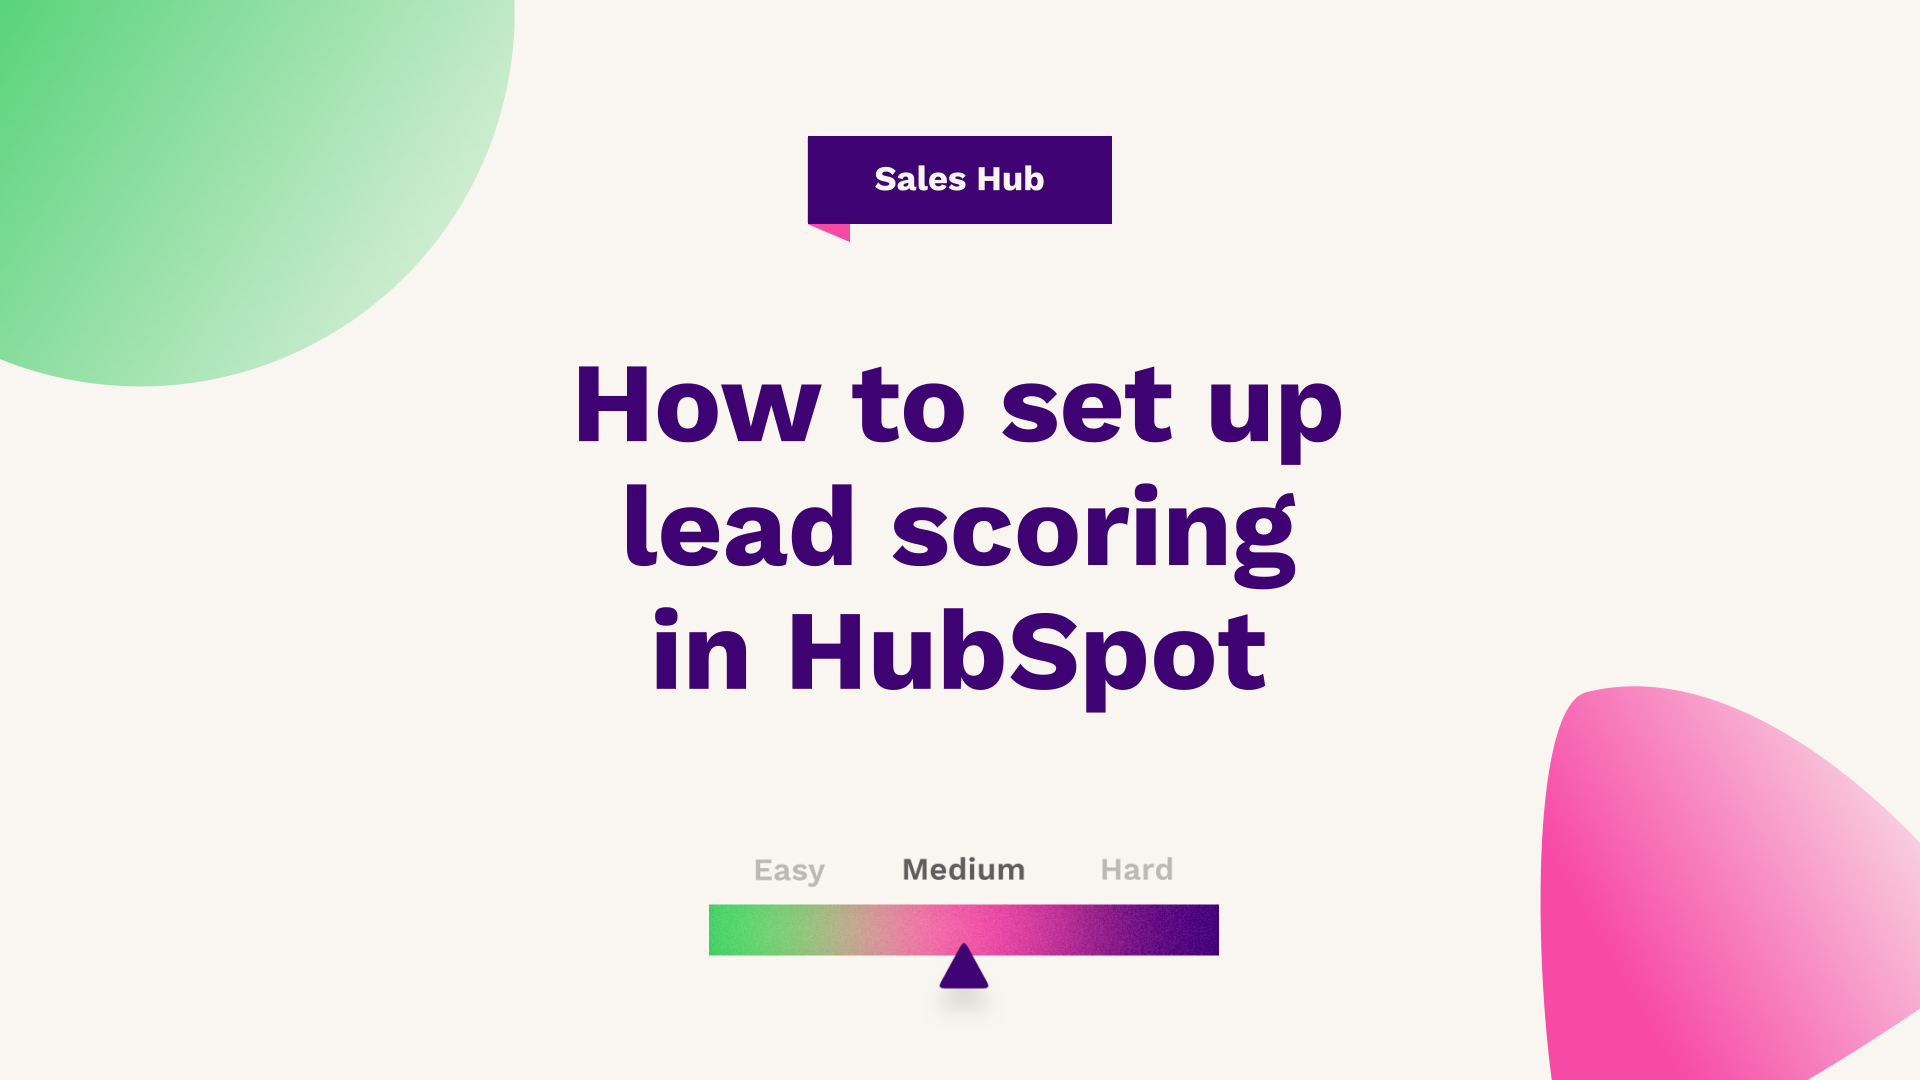 How to set up lead scoring in HubSpot